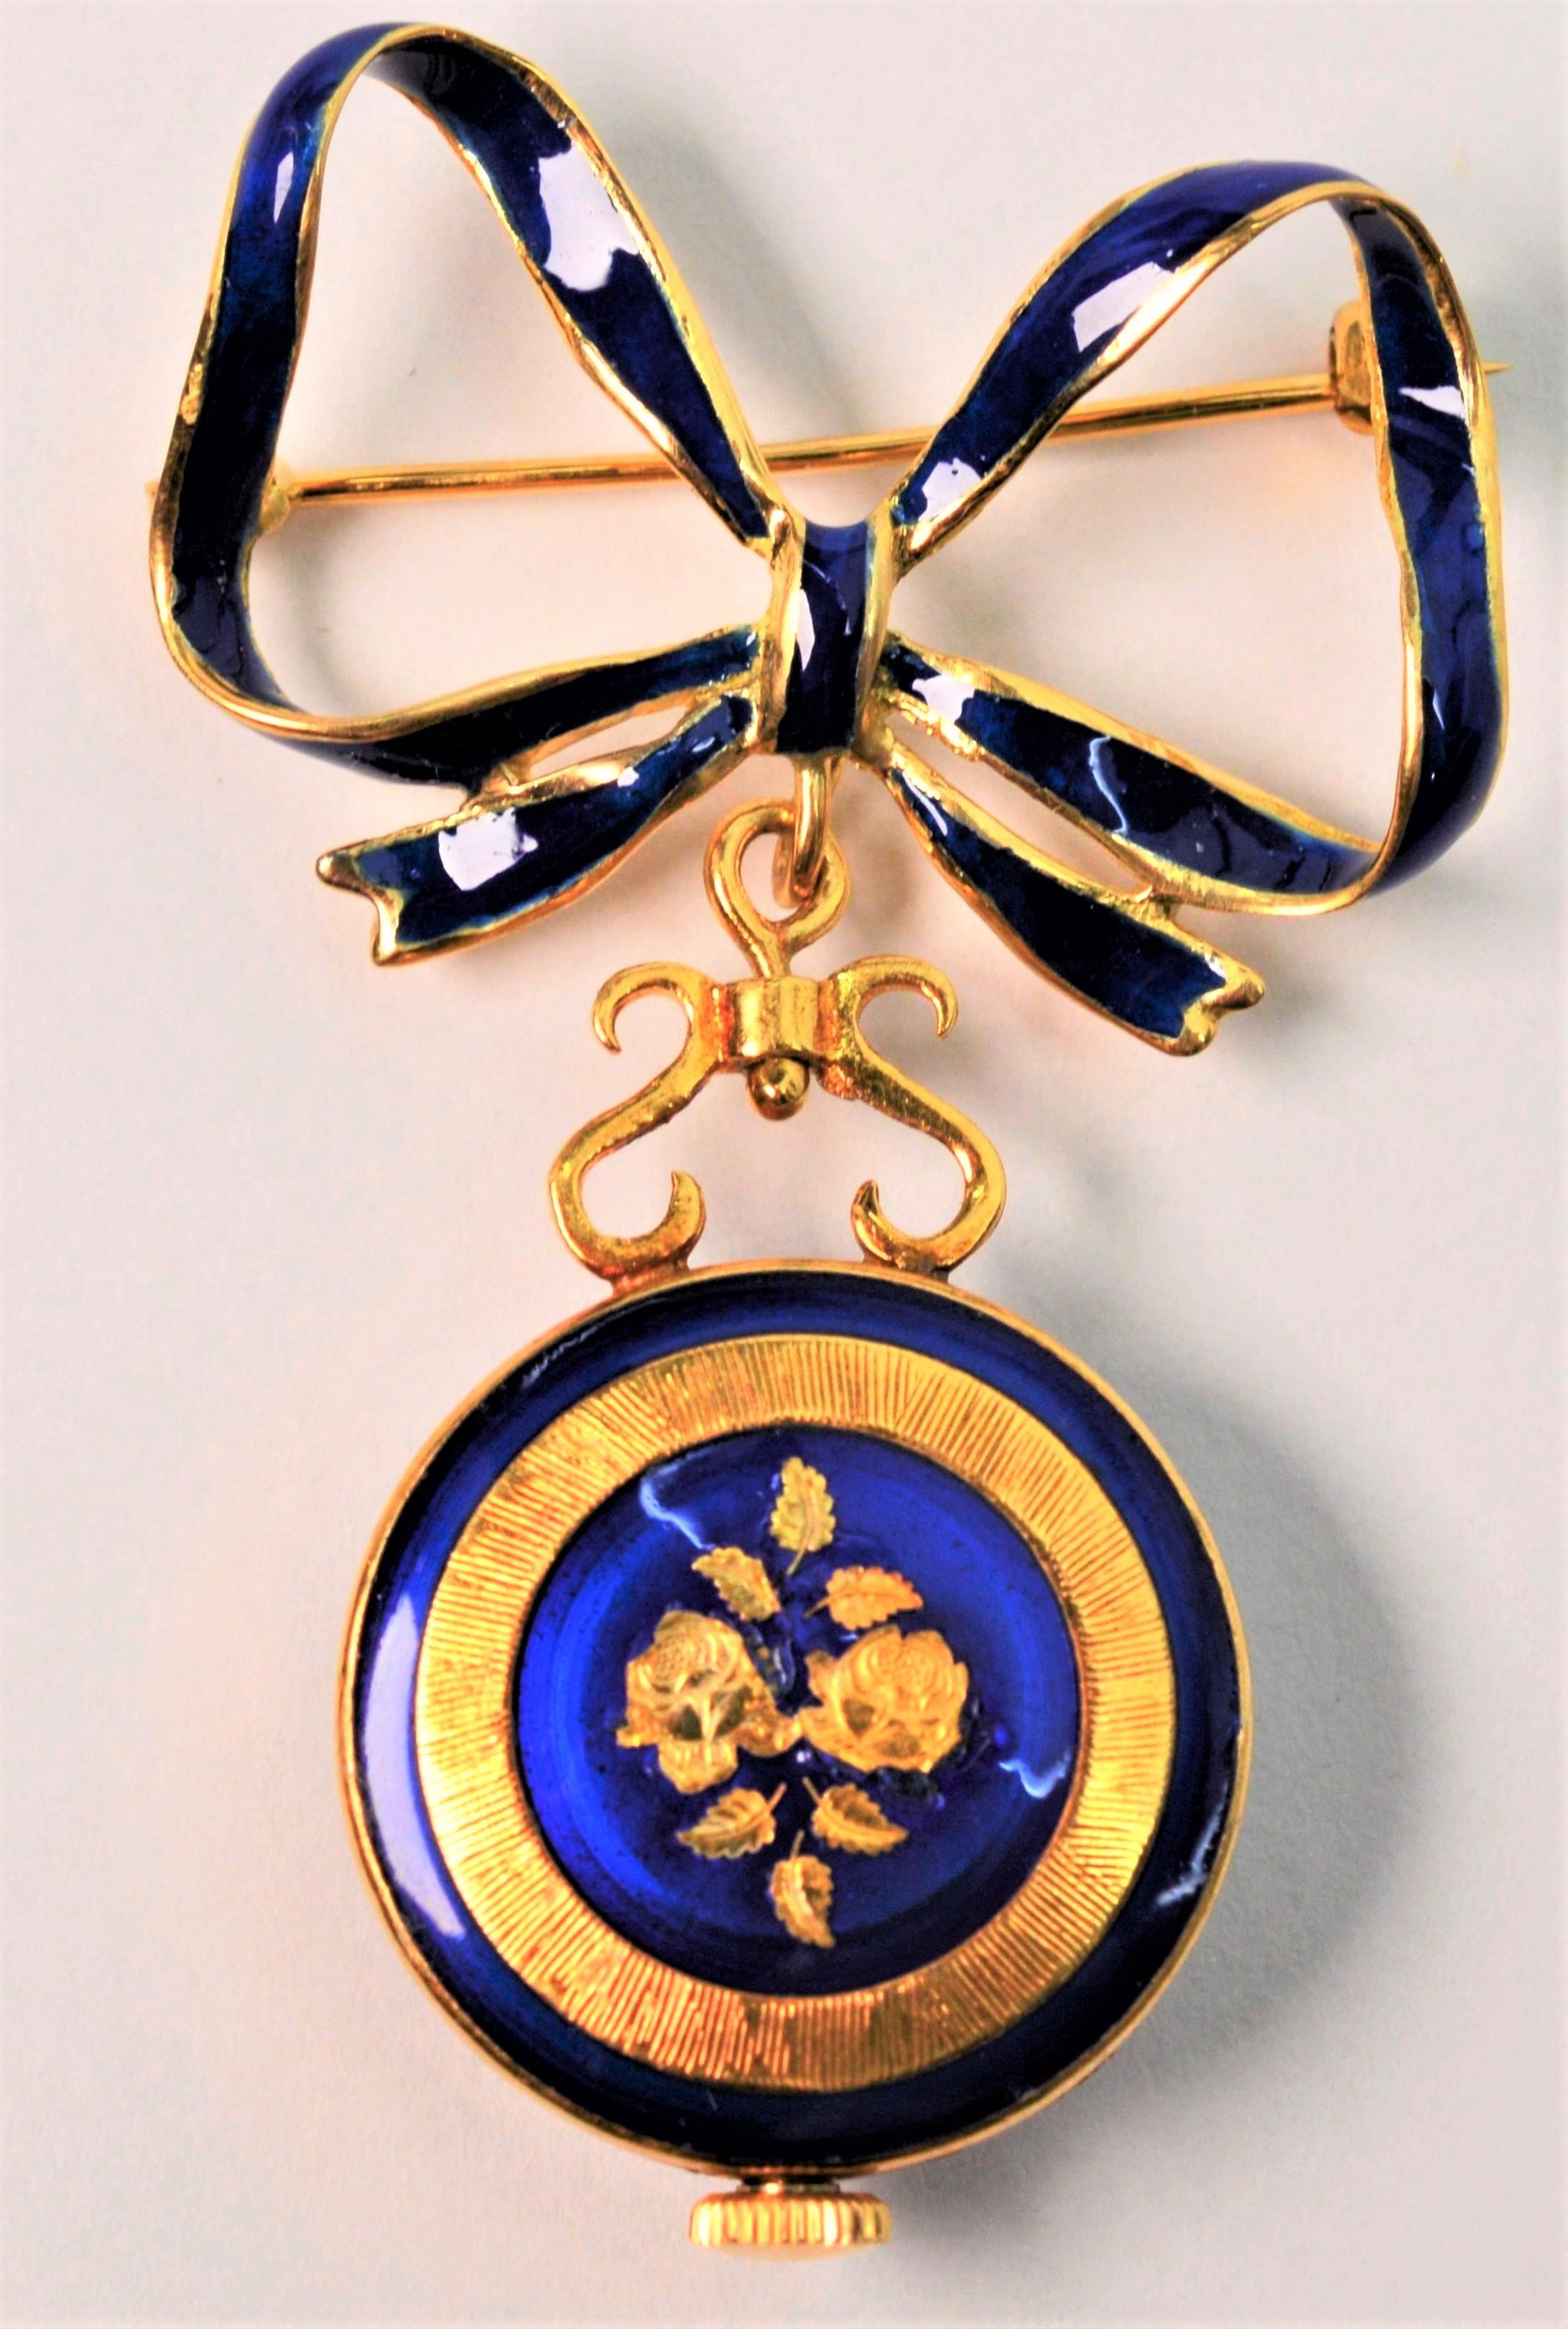 Women's Italian Made Gold Watch Brooch with Blue Enamel Accents For Sale